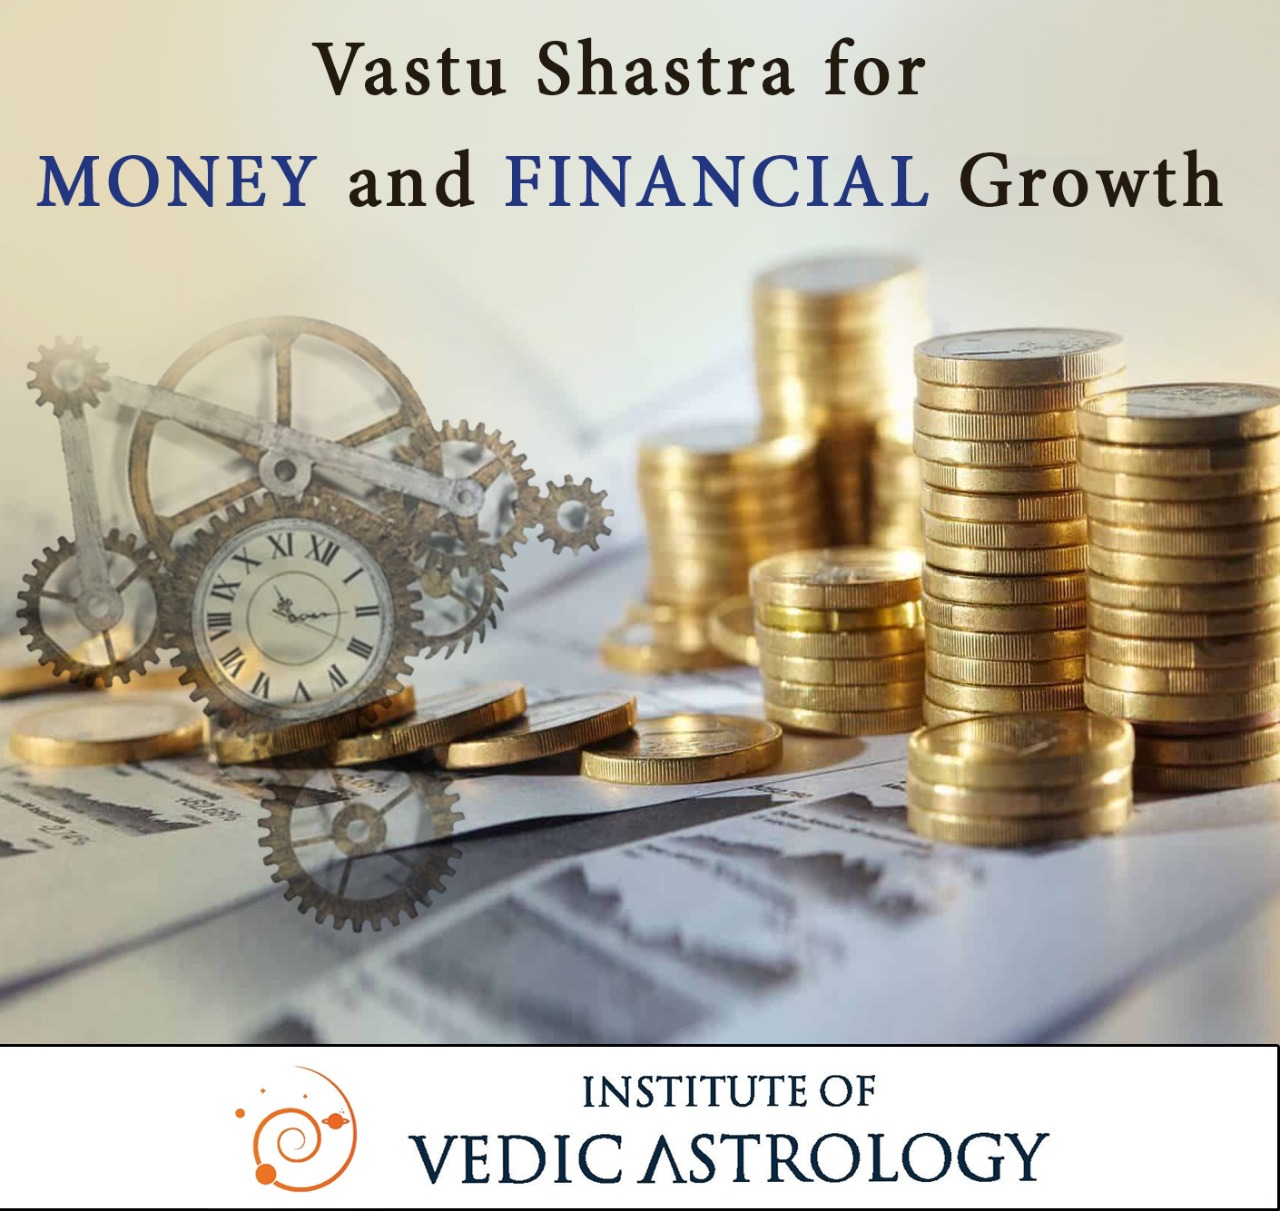 VASTU SHASTRA FOR MONEY AND FINANCIAL GROWTH